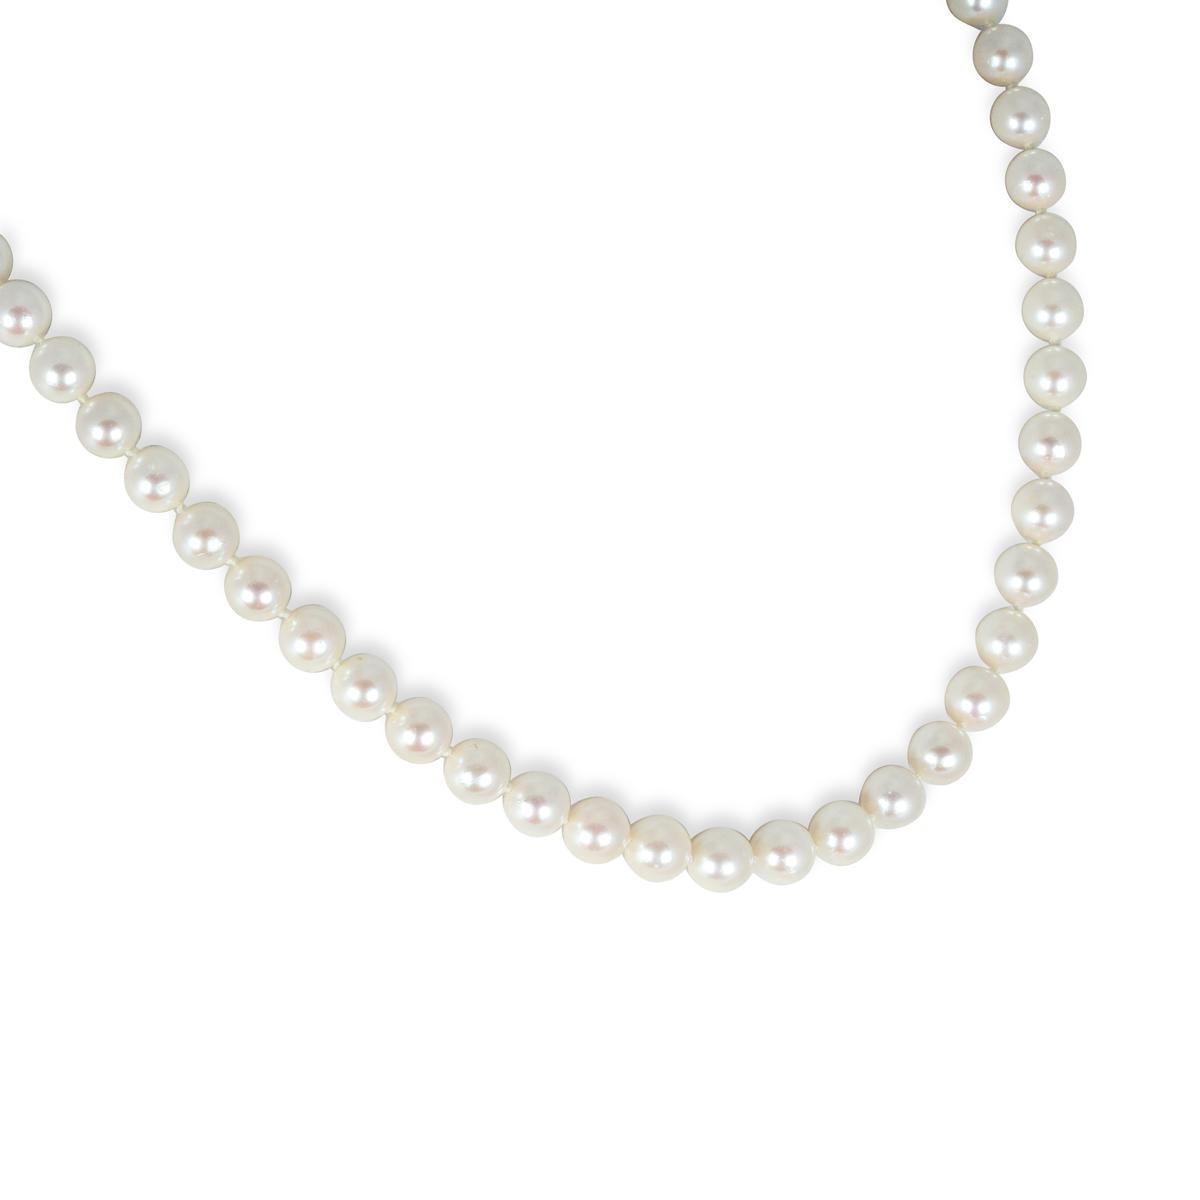 A beautiful 14k yellow gold pearl necklace. The necklace comprises of 56 individually knotted pearls which measure approximately 7mm each, finished with a 14k yellow gold filigree clasp. It measured approximately 18 inches in length and has a gross